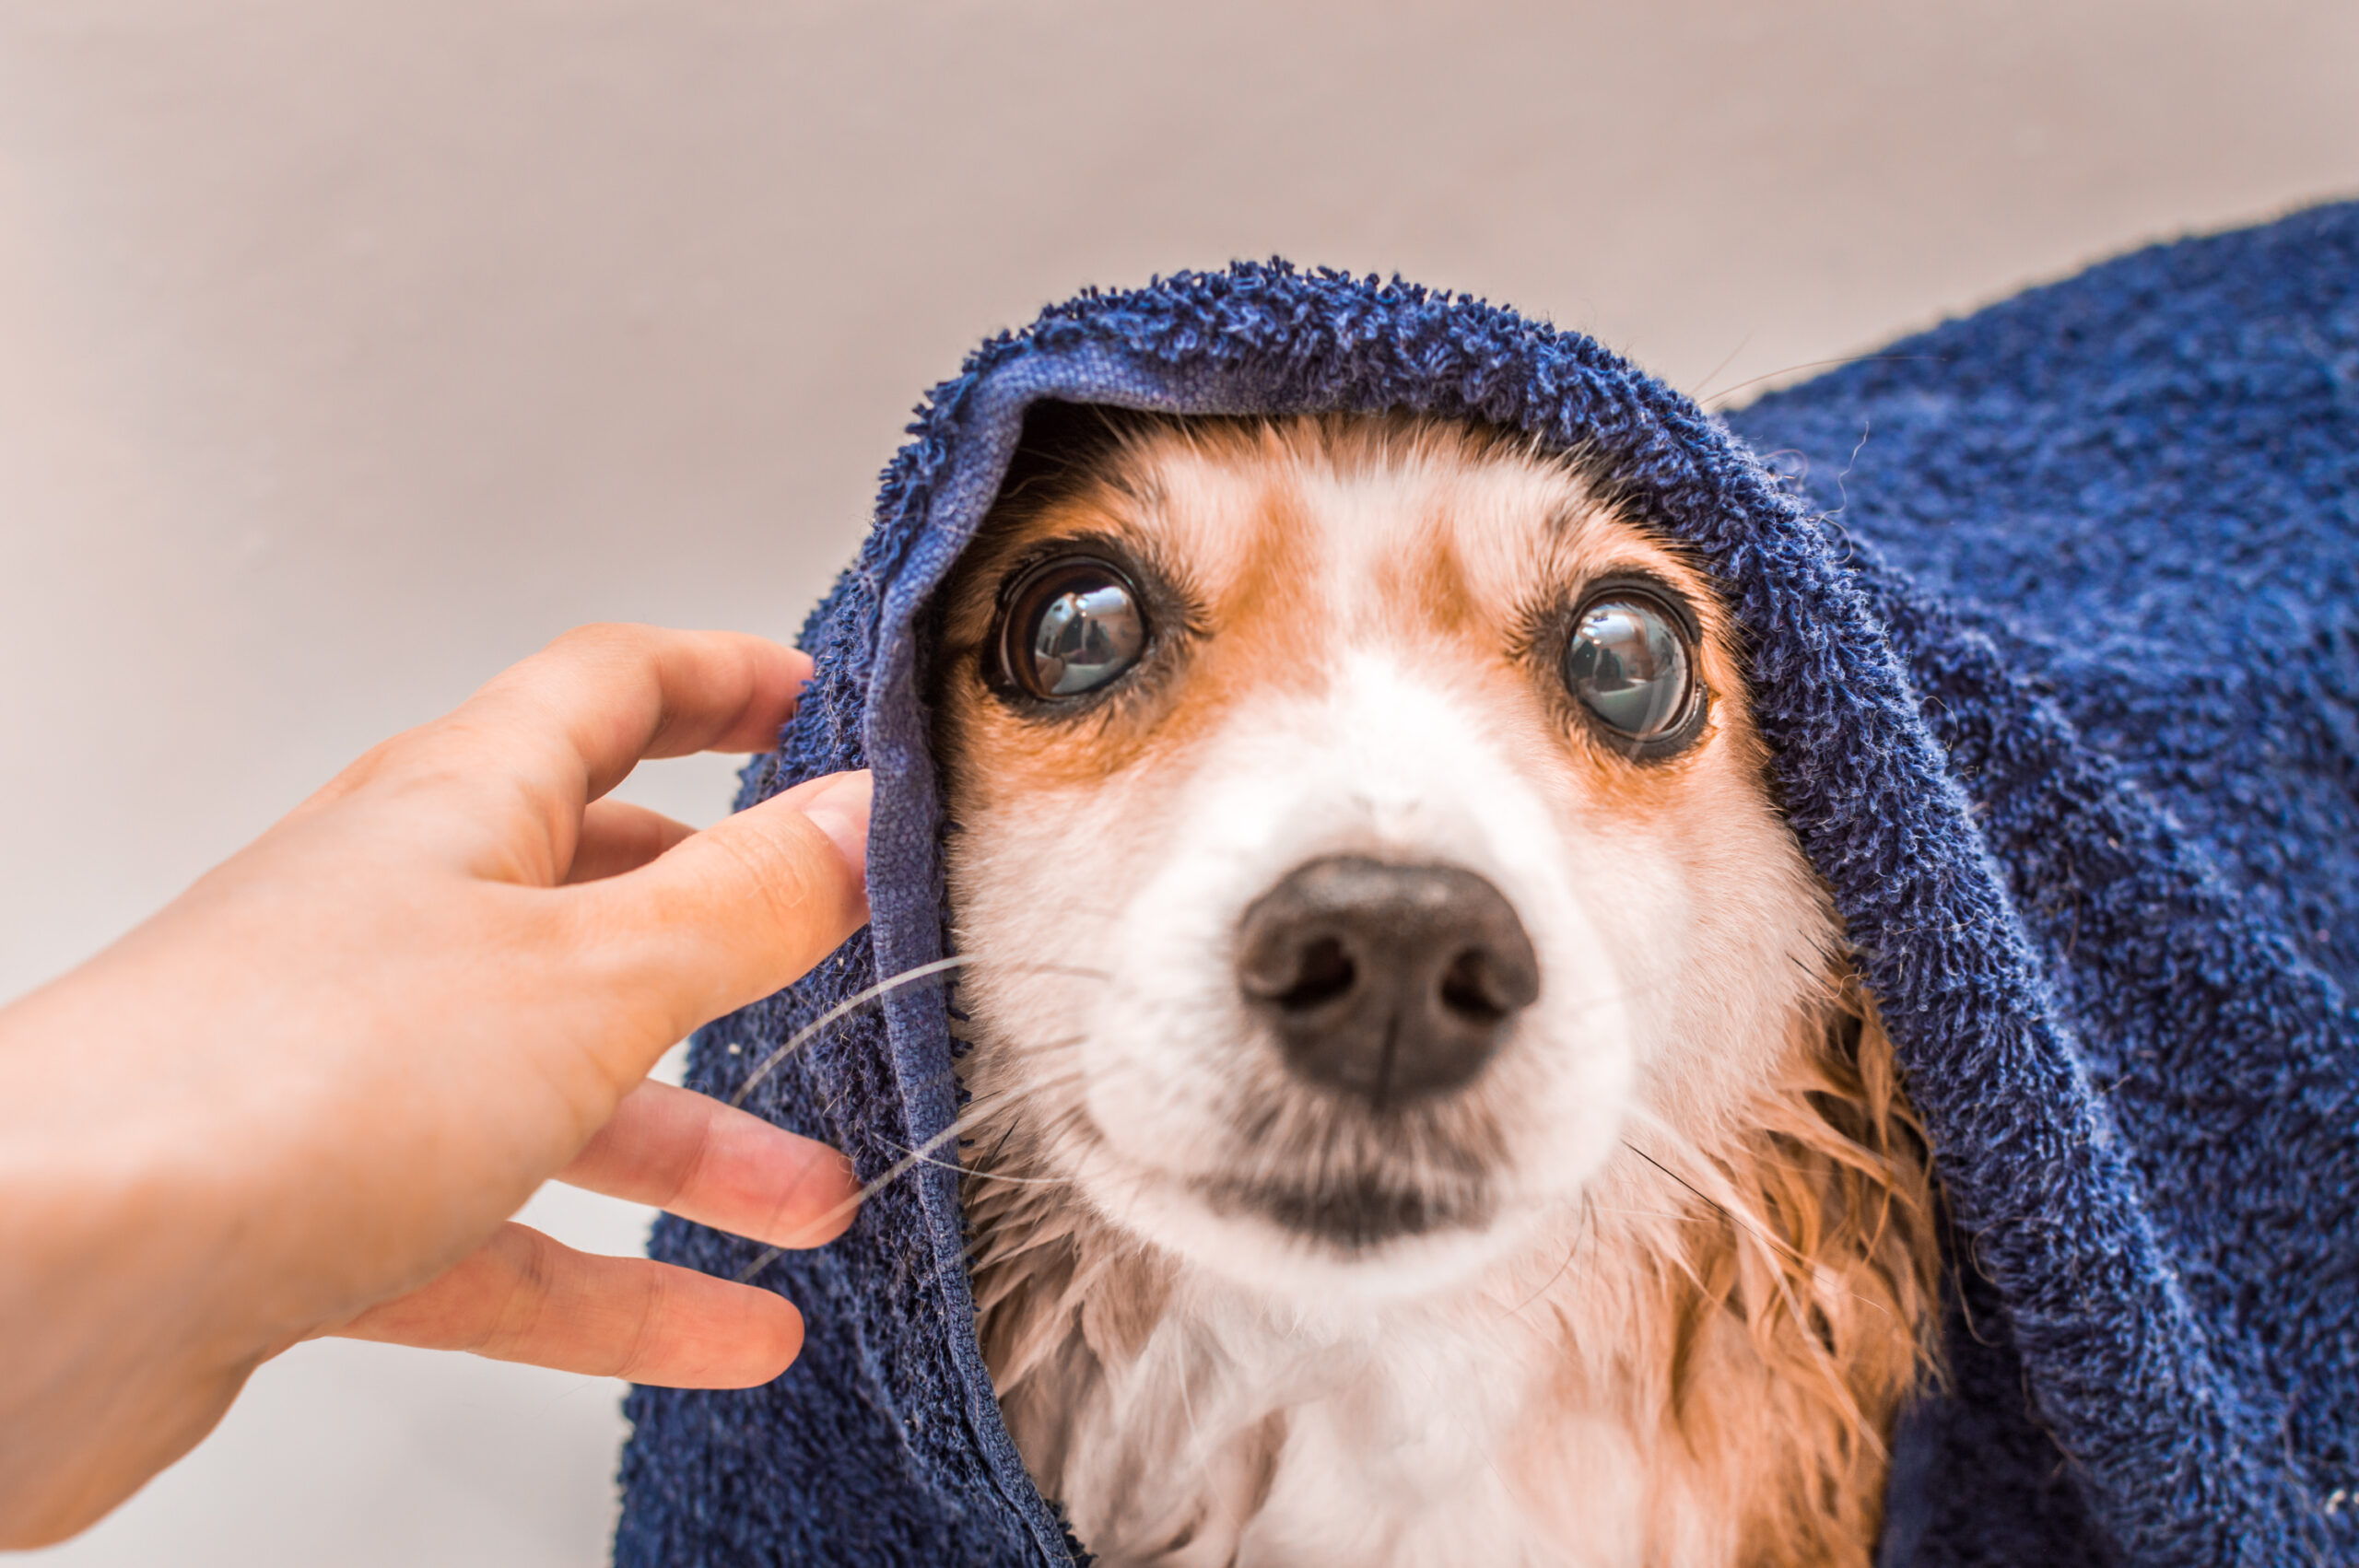 Trends and Products: Good Pet Grooming